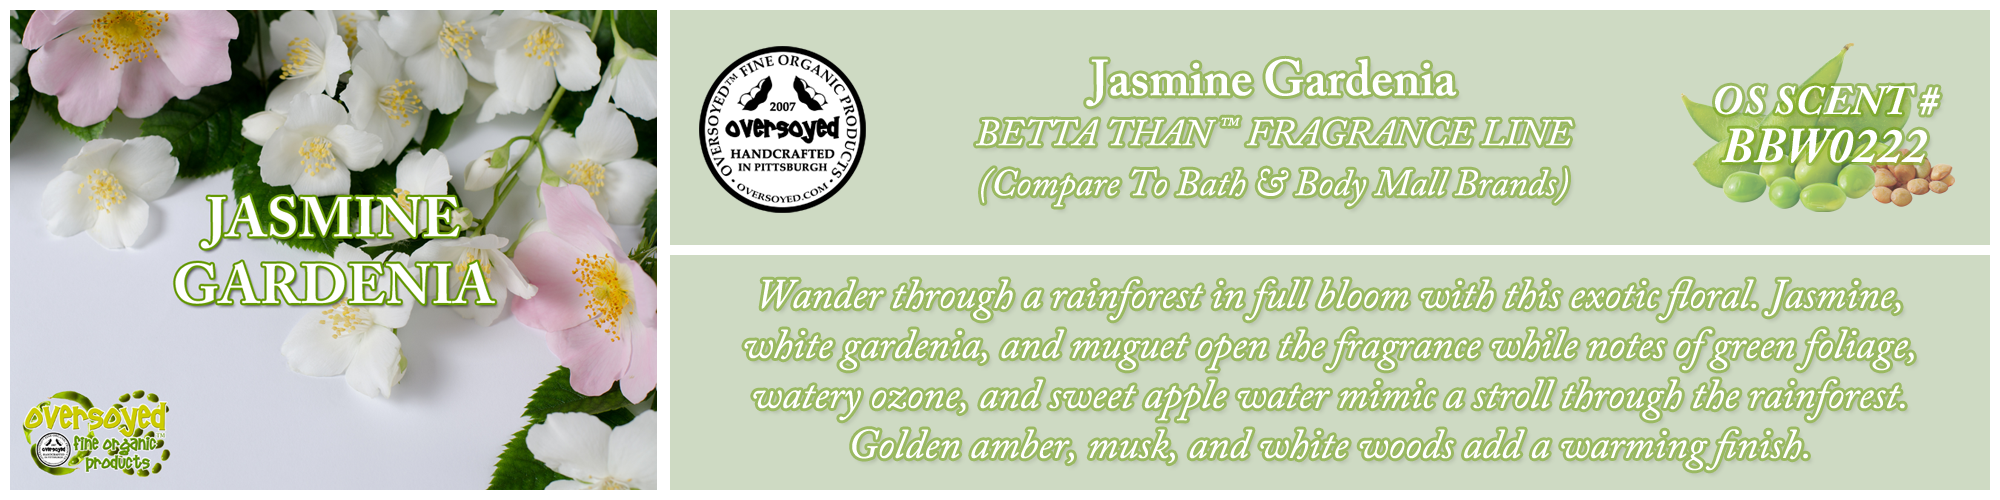 Jasmine Gardenia Handcrafted Products Collection